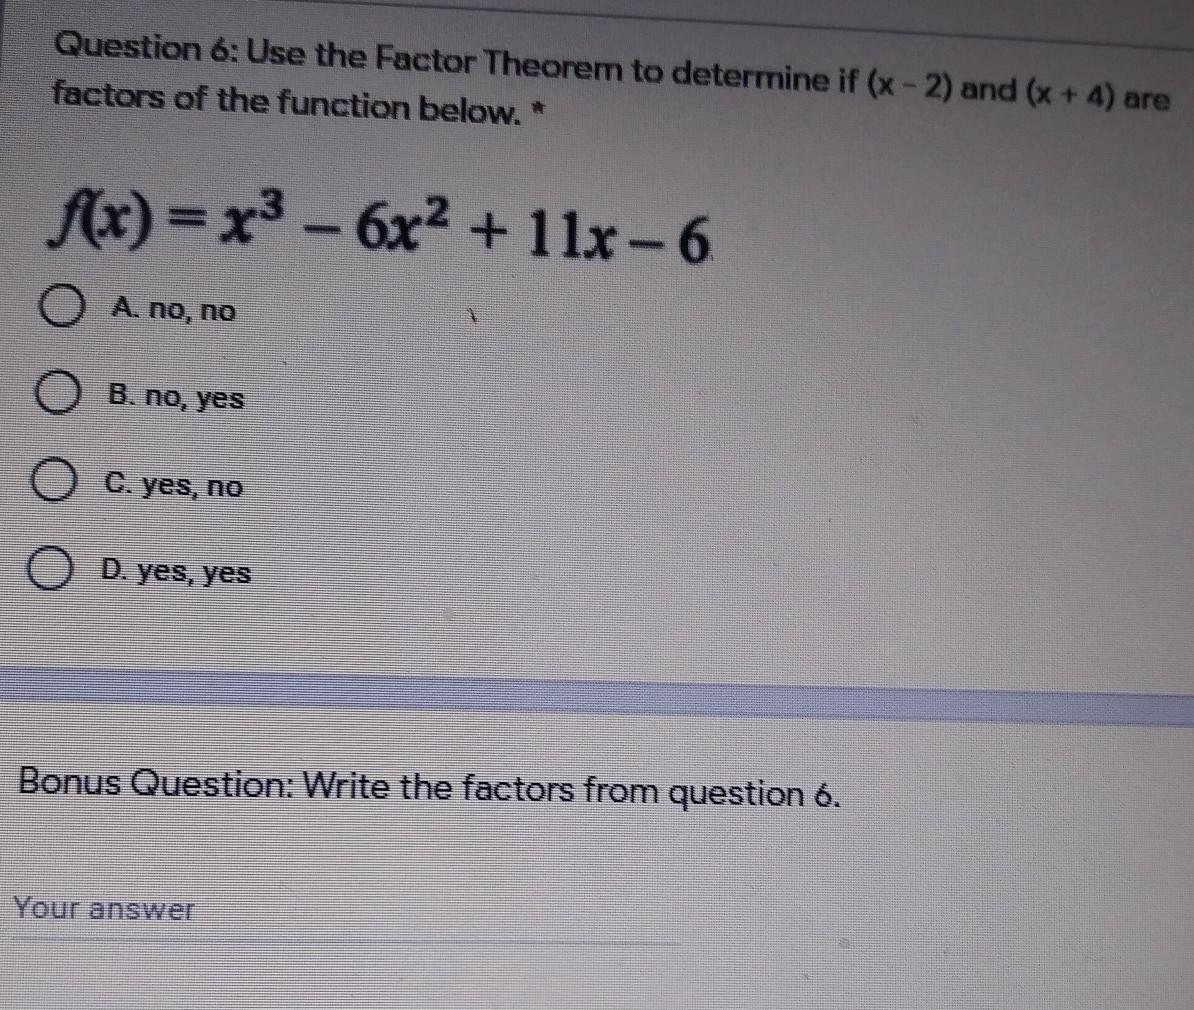 Use The Factor Theorem To Determine If( X - 2) + (x + 4) Are Factors Of The Function Below 